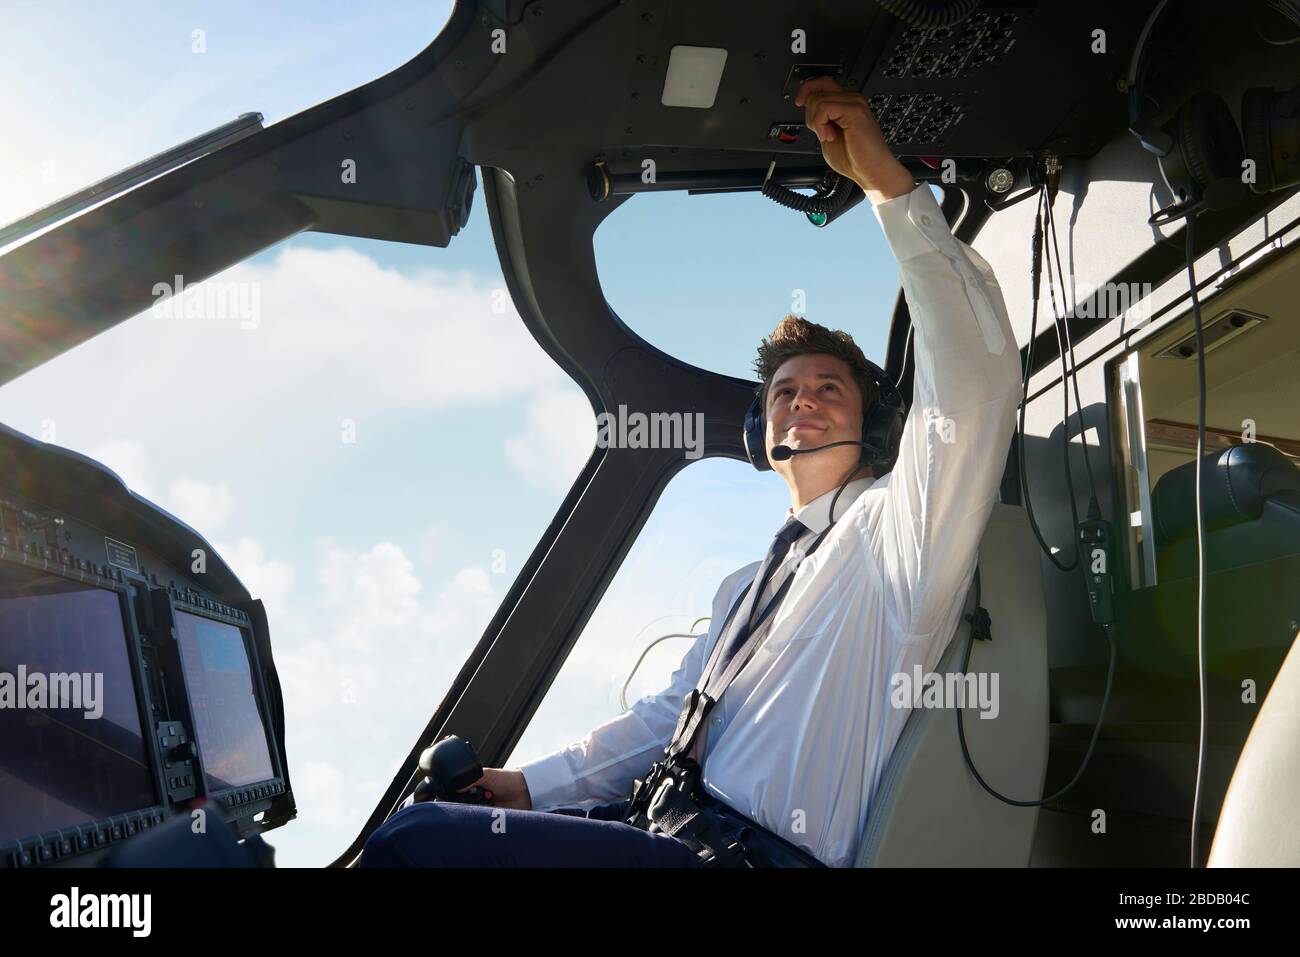 Male Pilot In Cockpit Of Helicopter Doing Pre Flight Check Before Take Off Stock Photo